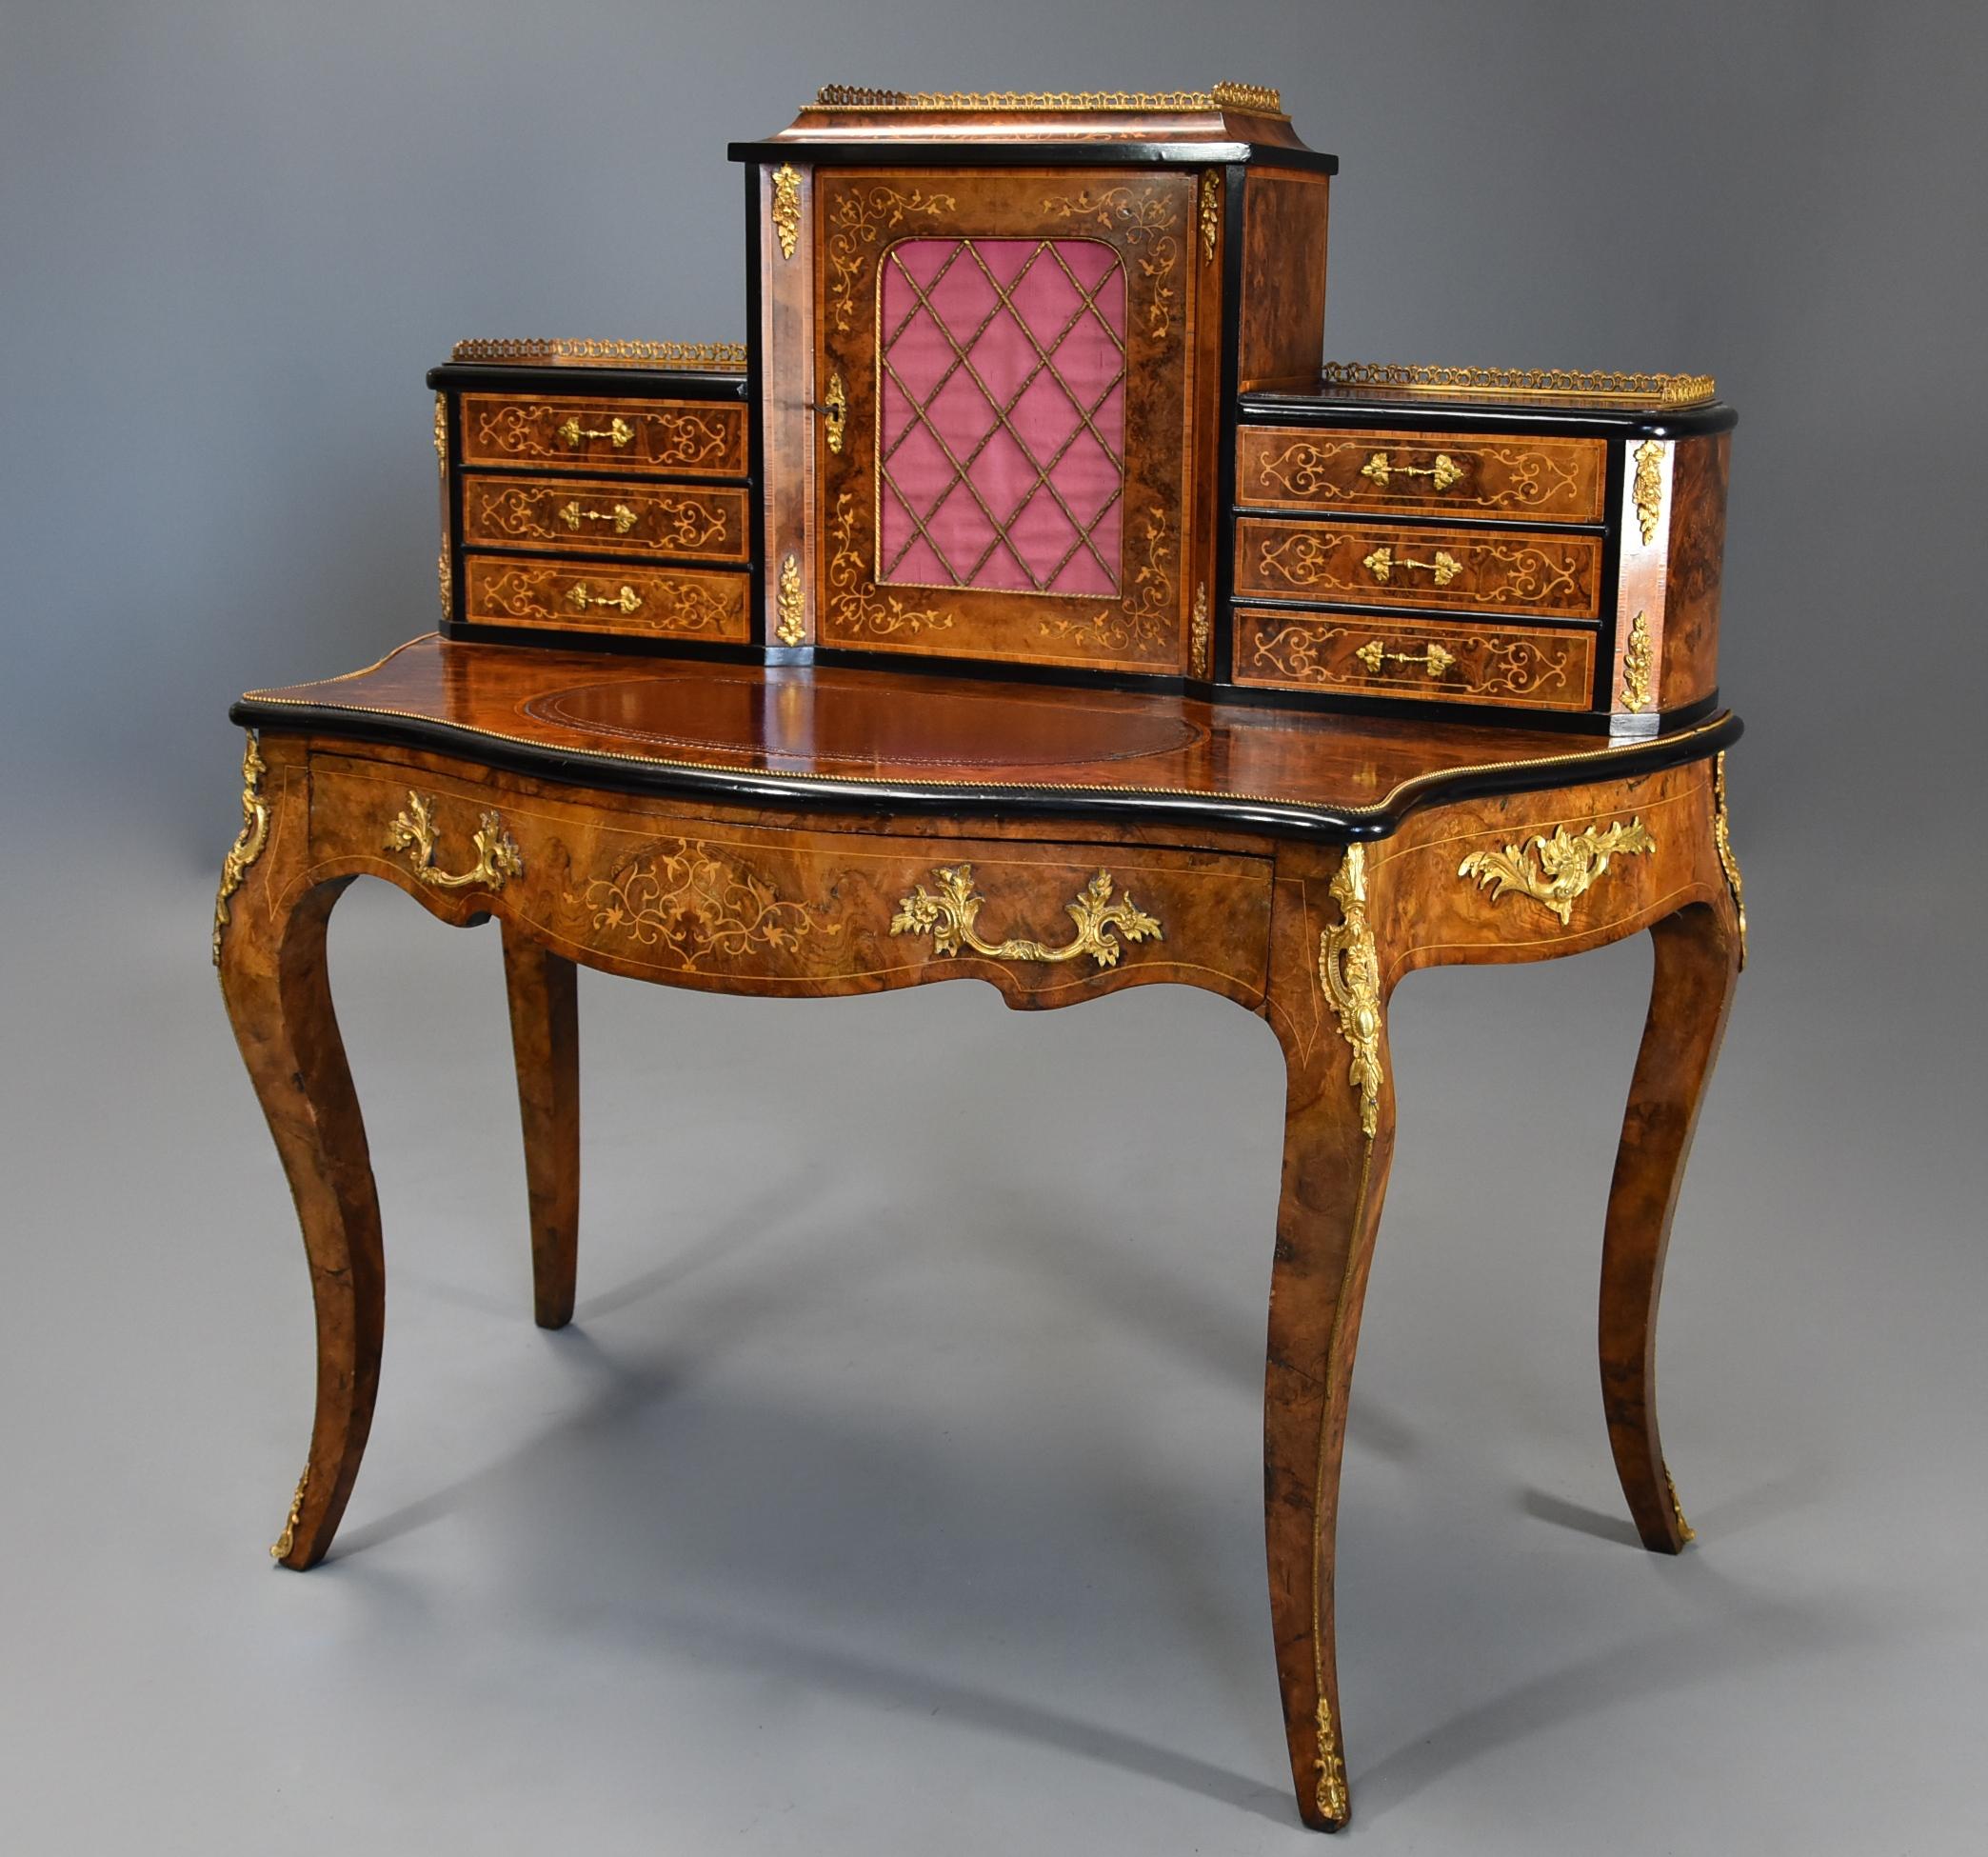 A mid-19th century fine quality burr walnut bonheur de jour in the French style. 

This piece consists of a structure of six small drawers to the top, three drawers to either side of the cupboard with fine quality pierced brass gilt gallery to the